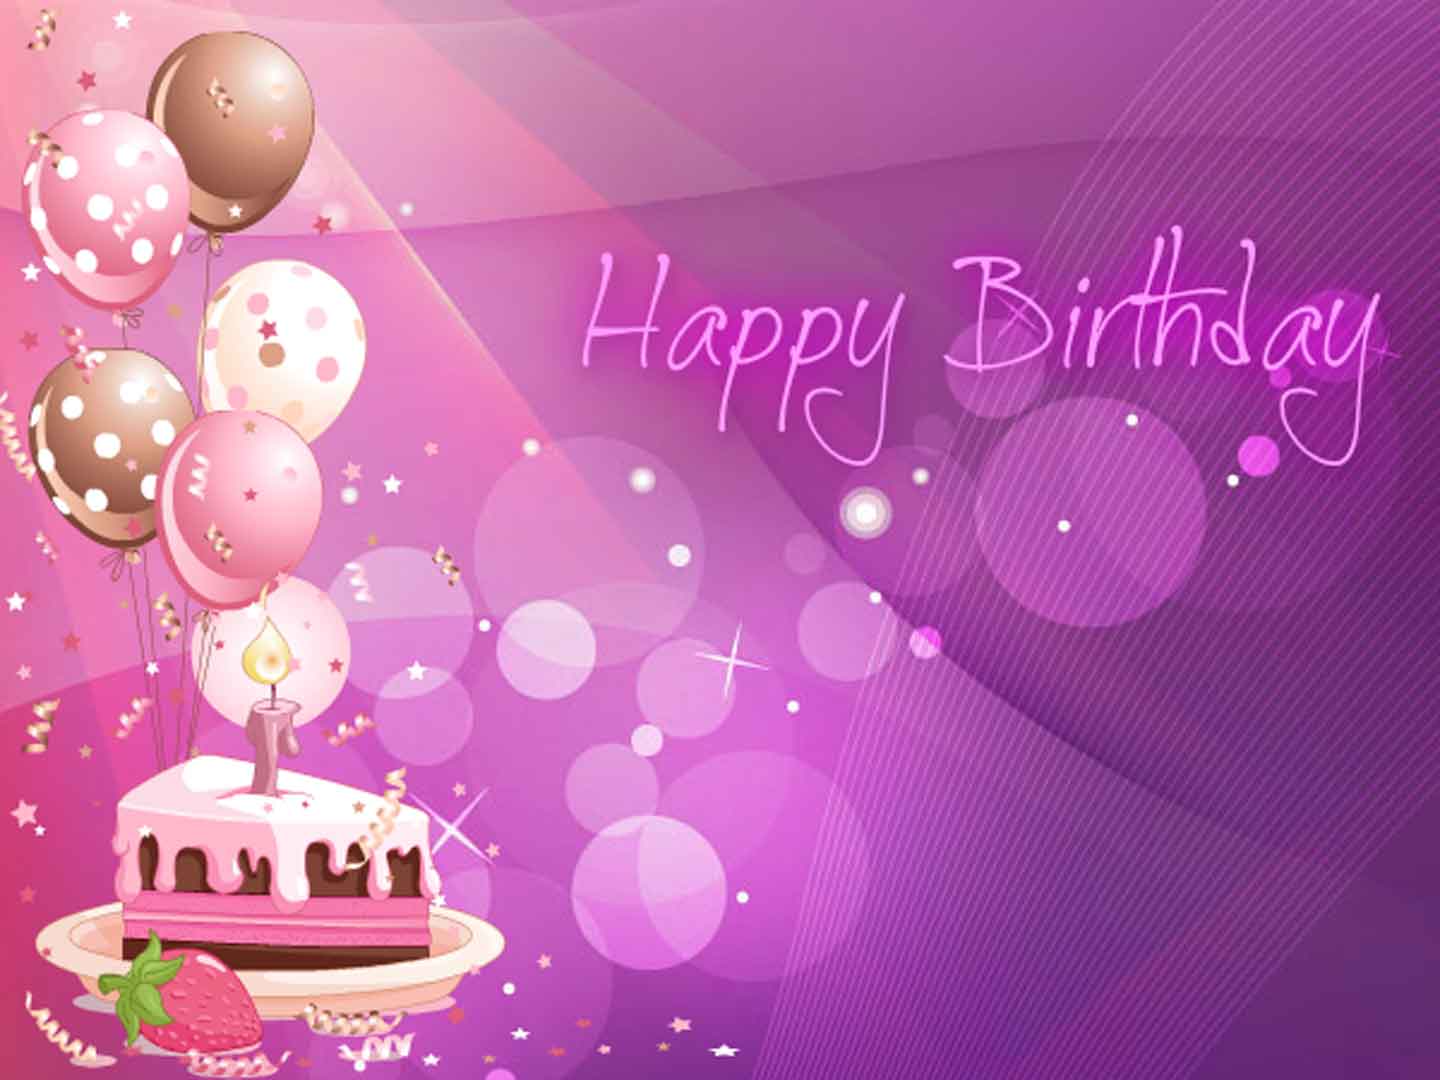 Wallpapers Of Happy Birthday